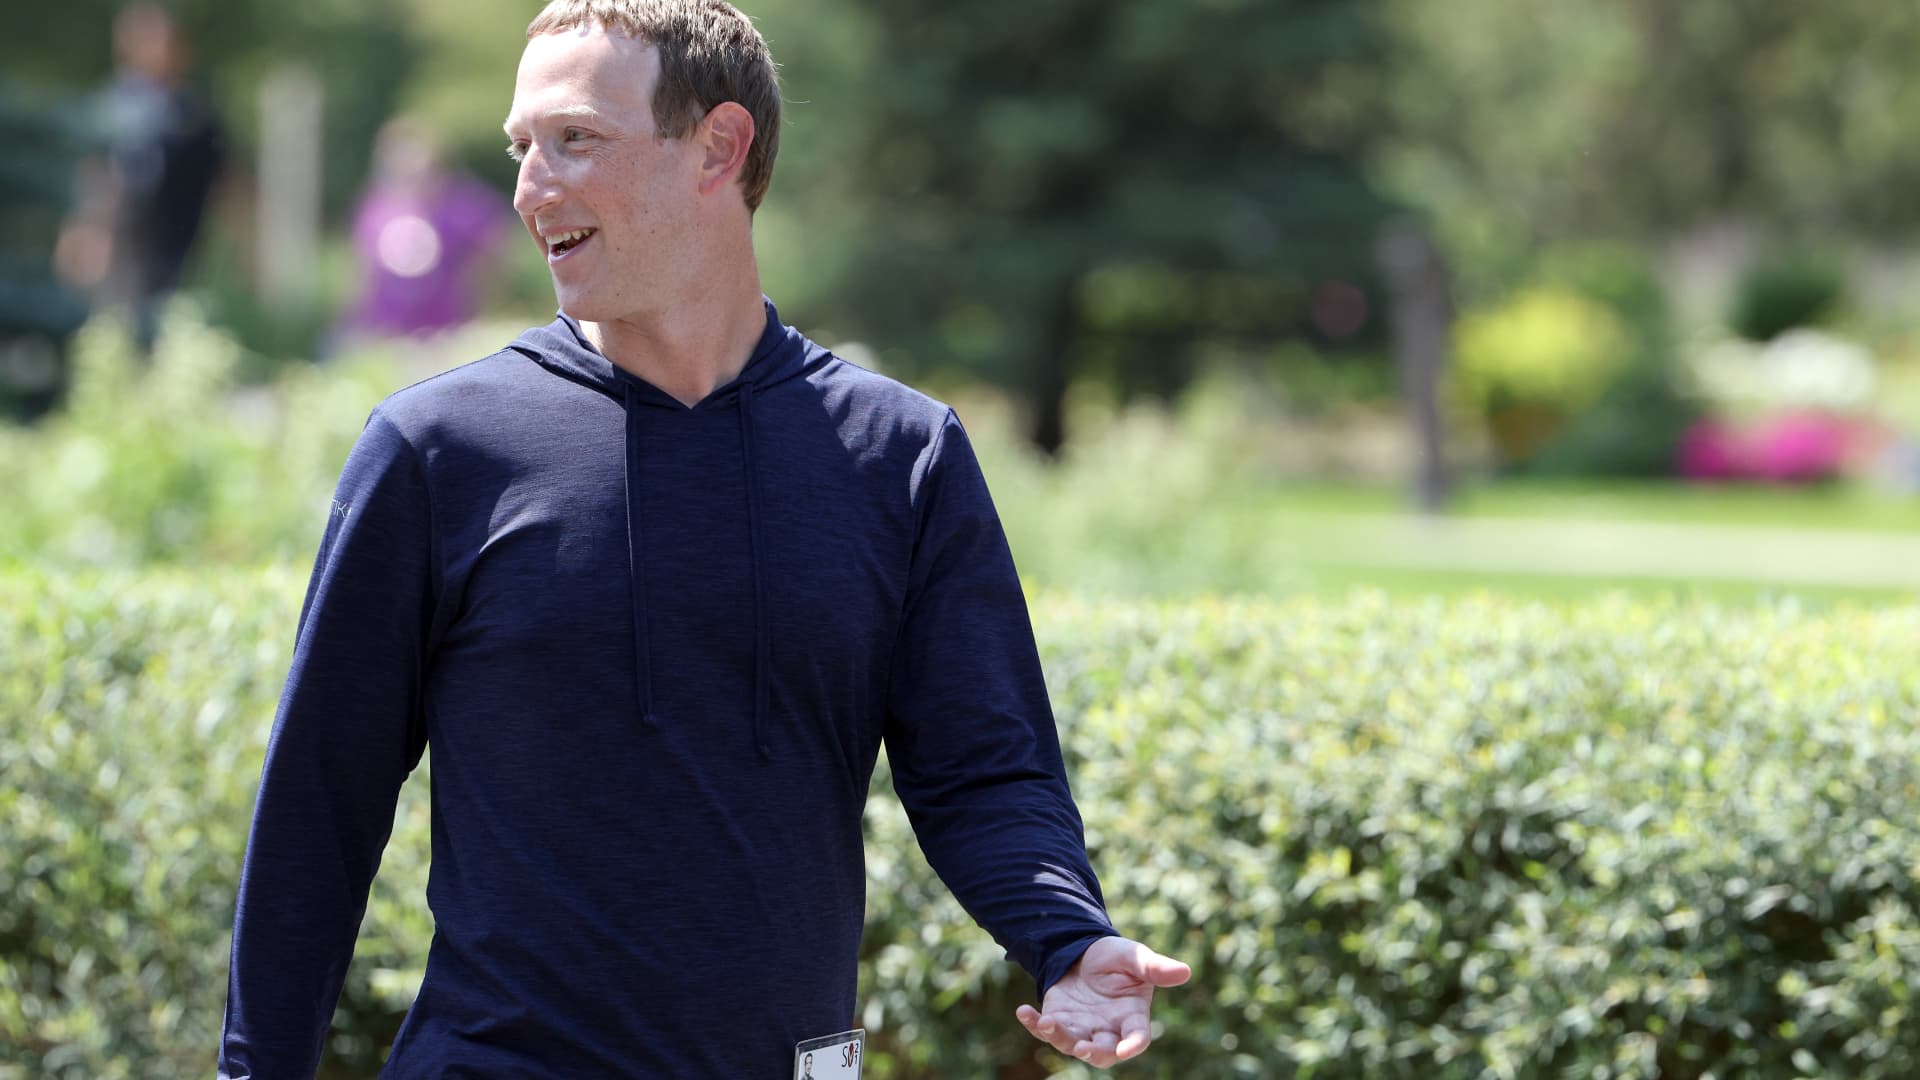 Mark Zuckerberg says Apple’s App Store policies are not ‘sustainable or good place to be’